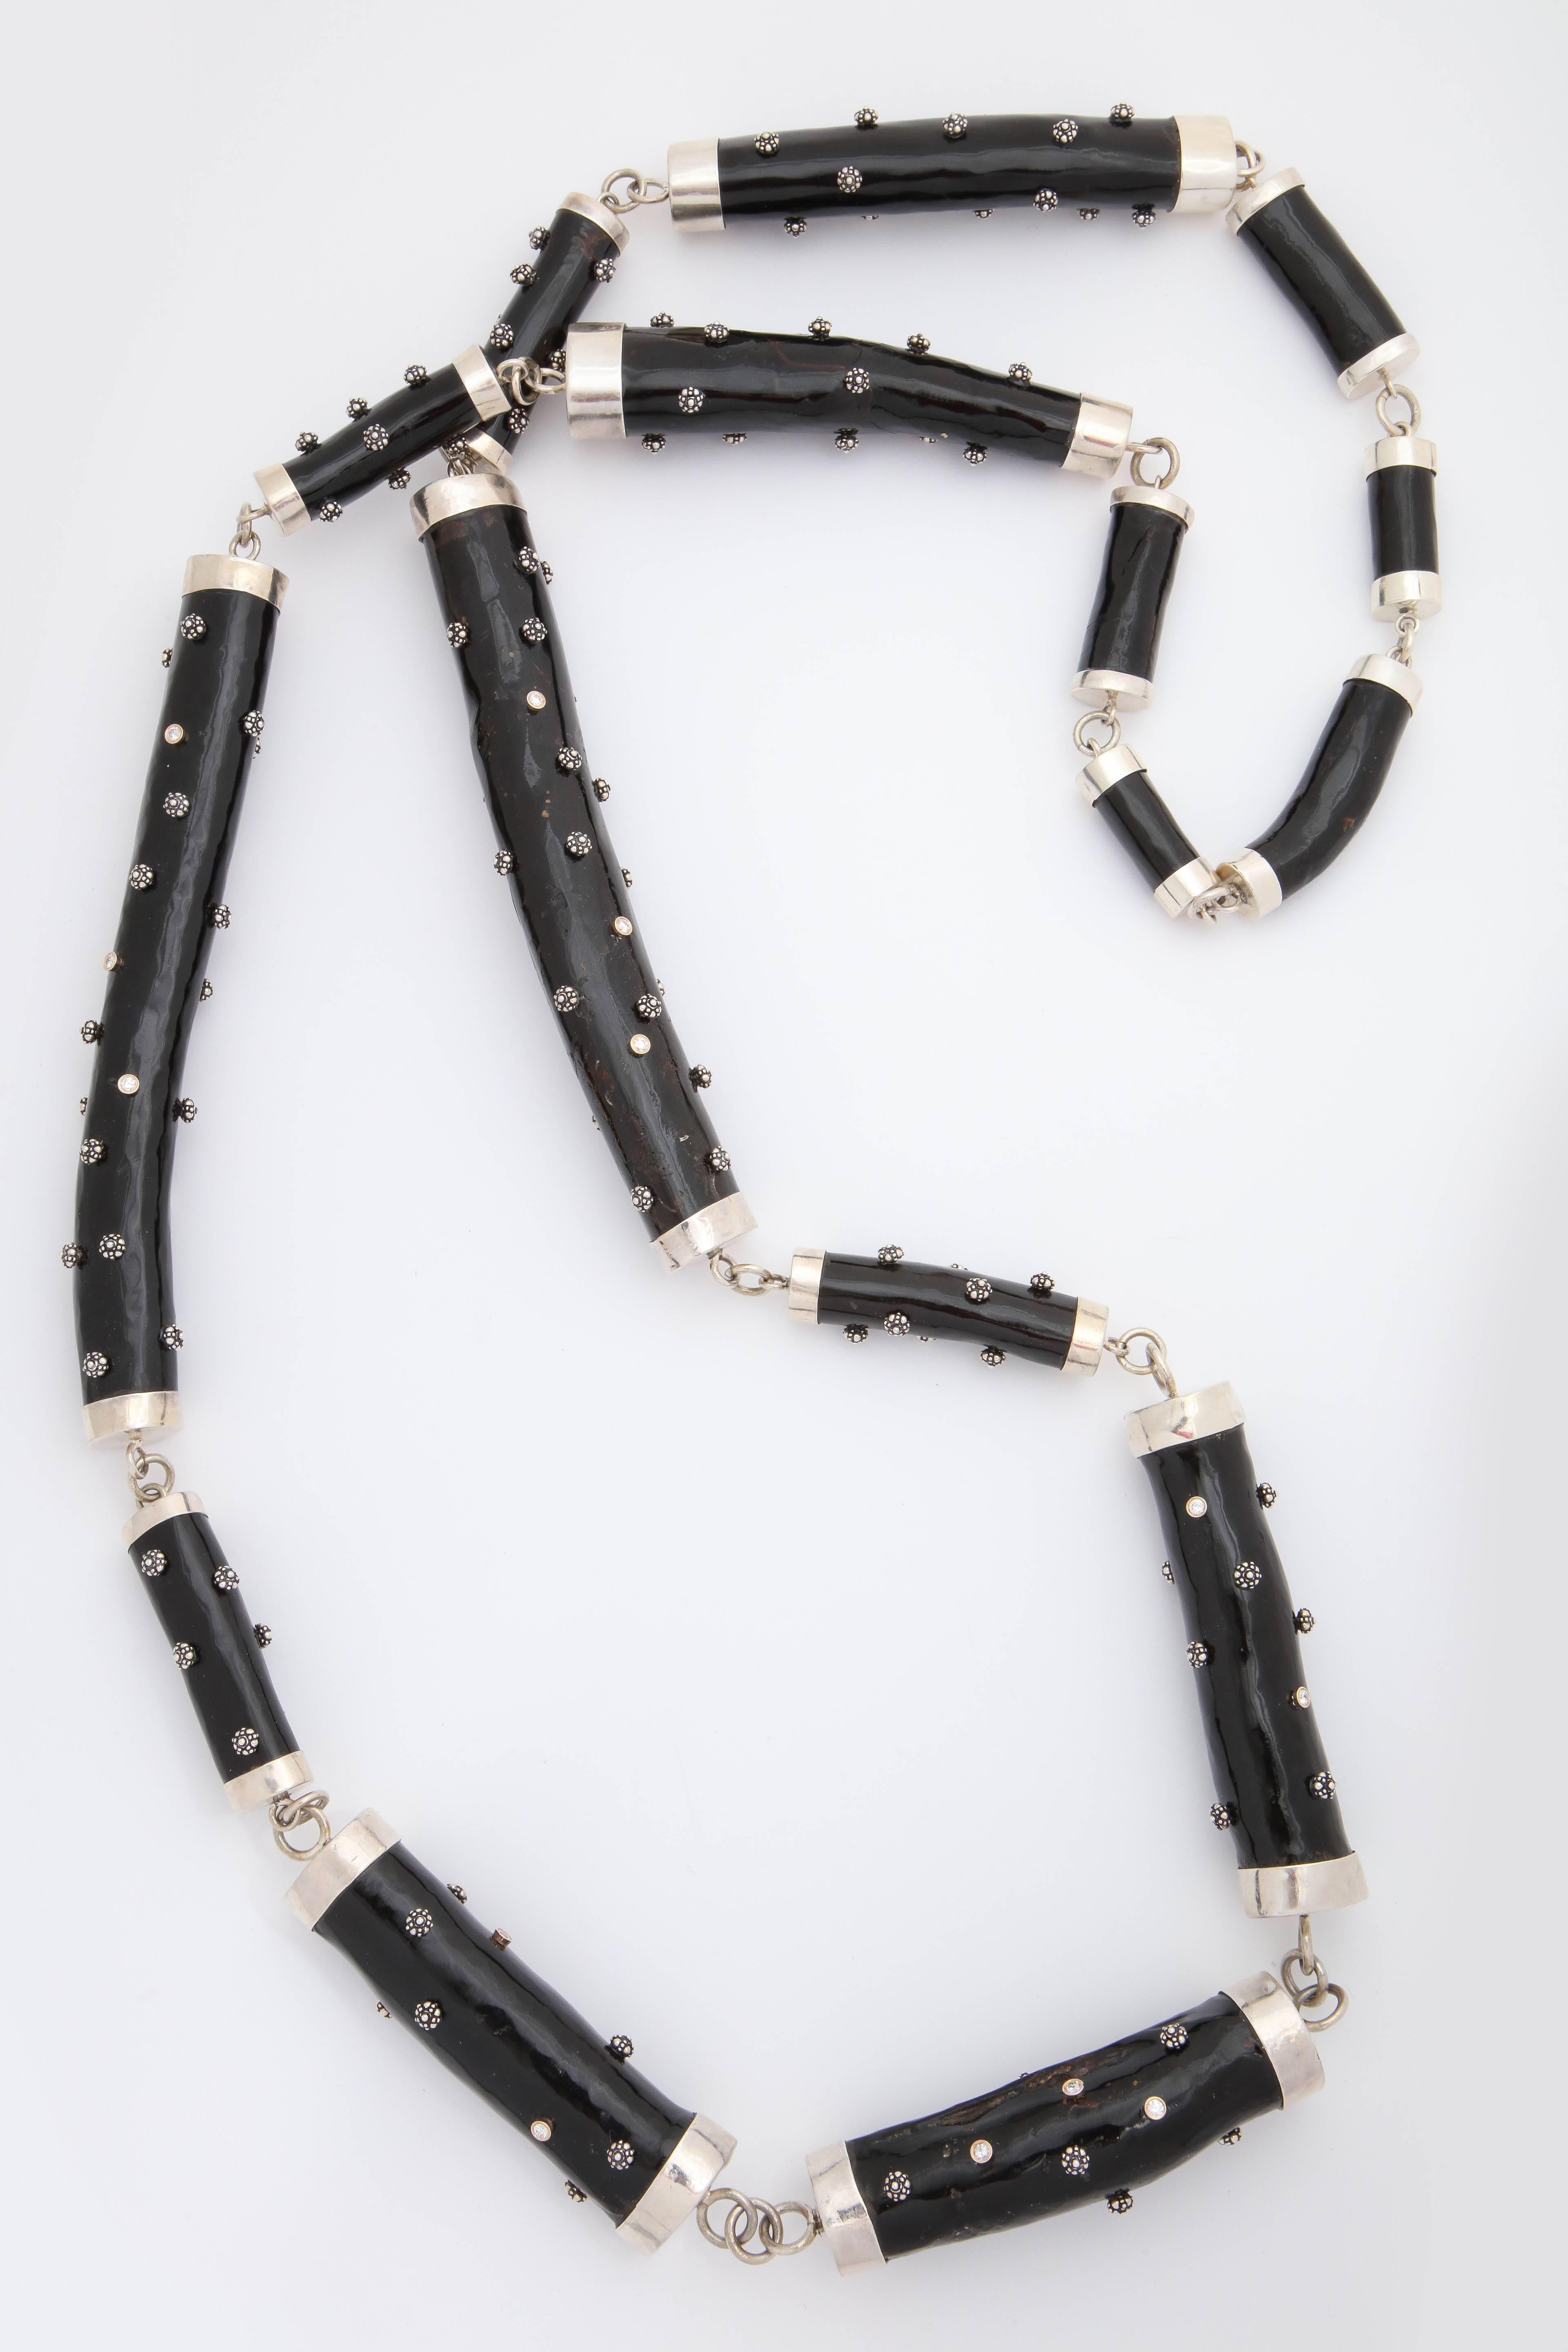 A necklace composed of natural black coral, bezel set diamonds and and sterling silver. The coral branches have sterling silver caps and are linked together with sterling silver rings. The coral is set with sterling silver flowers and bezel set